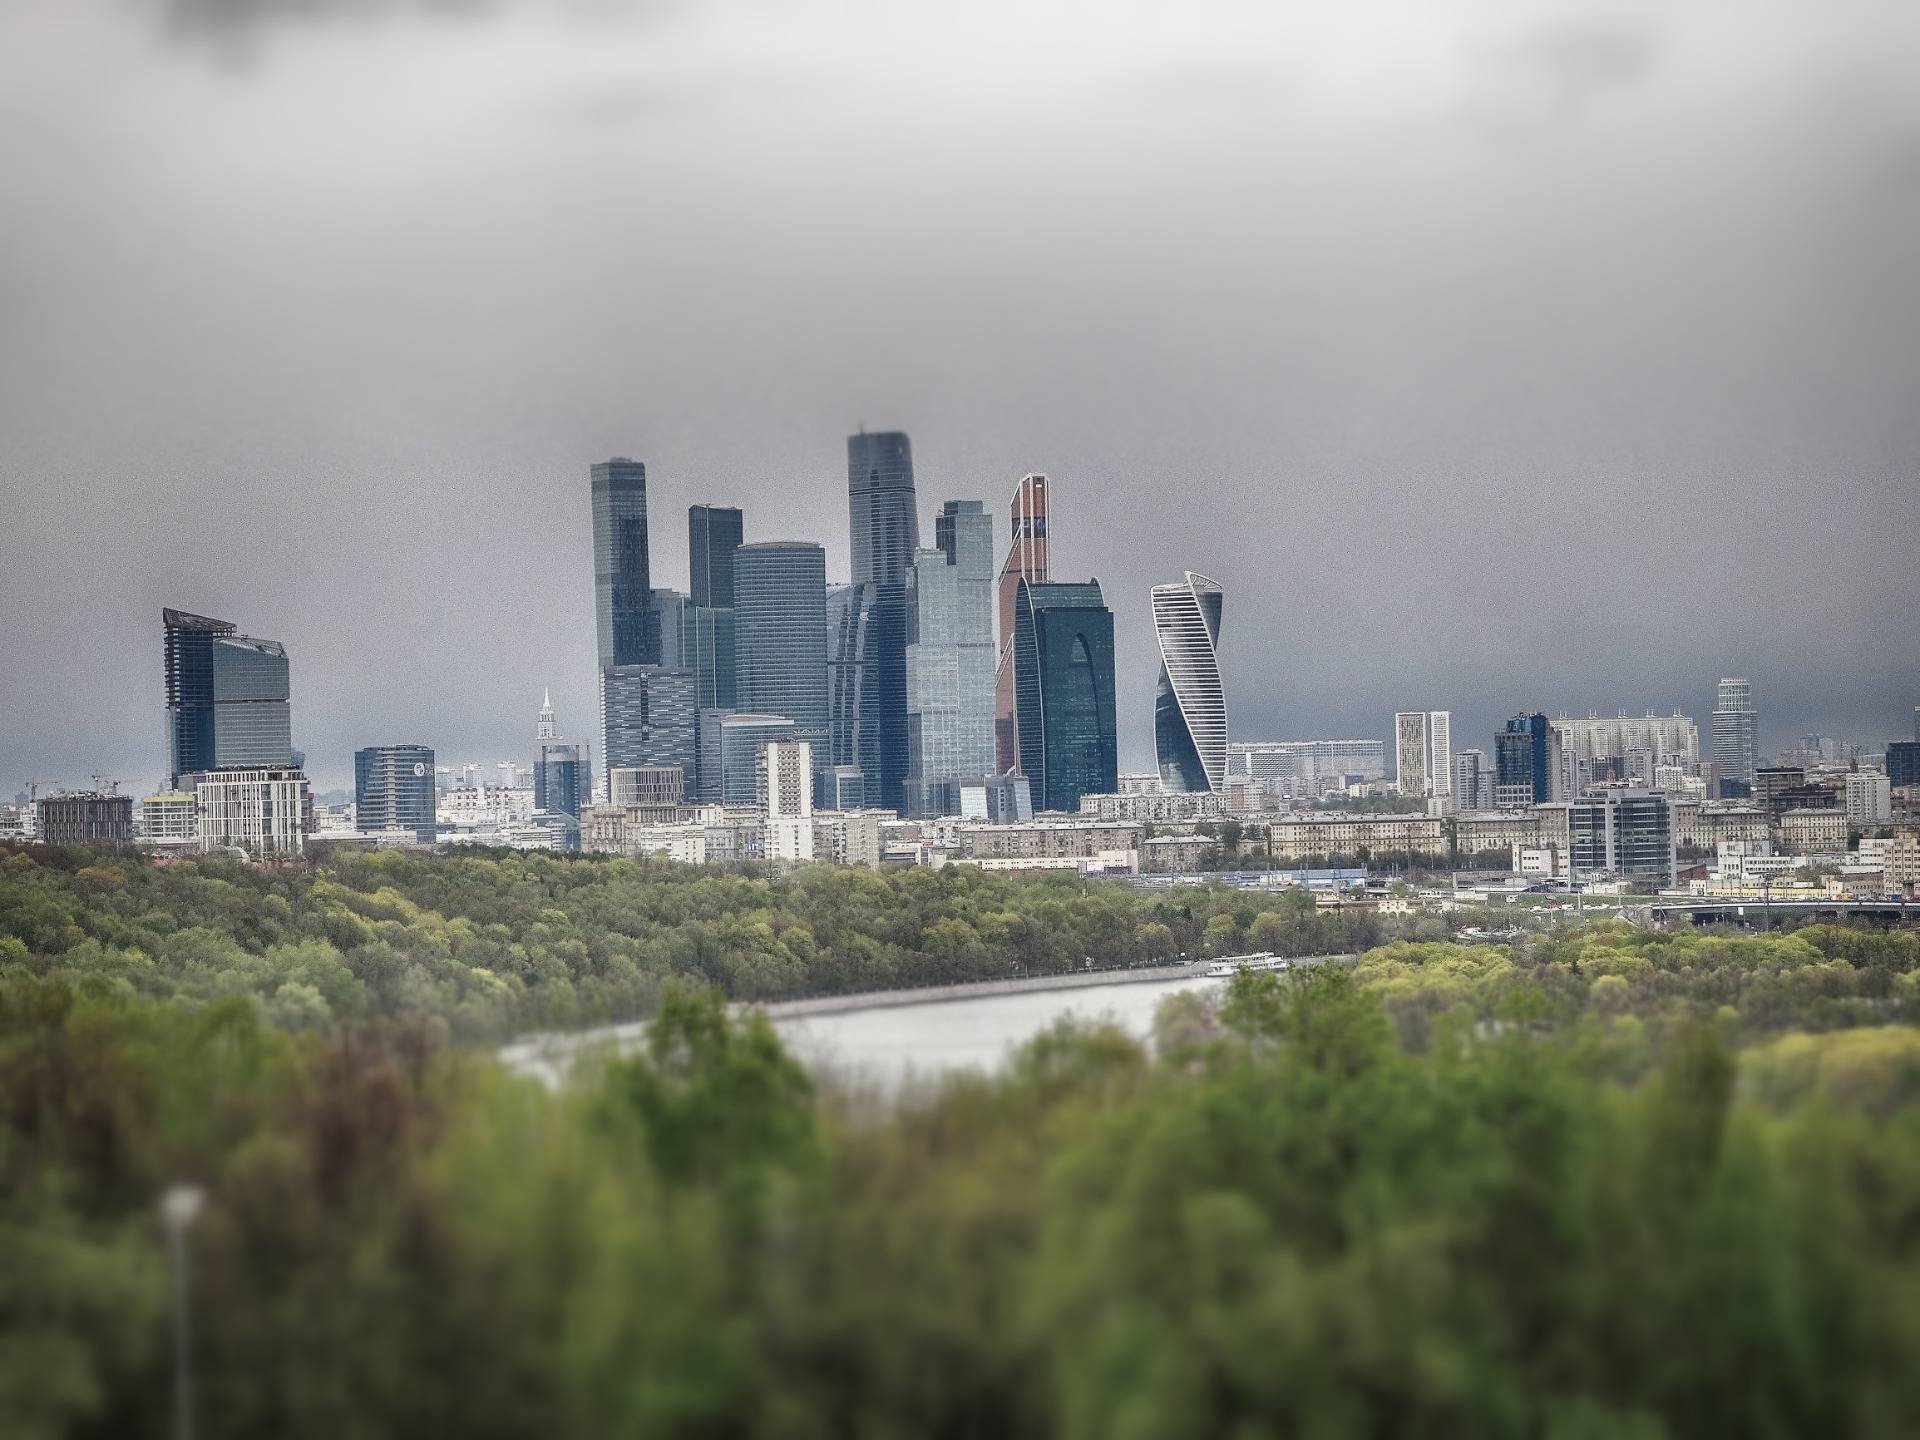 The modern part of Moscow